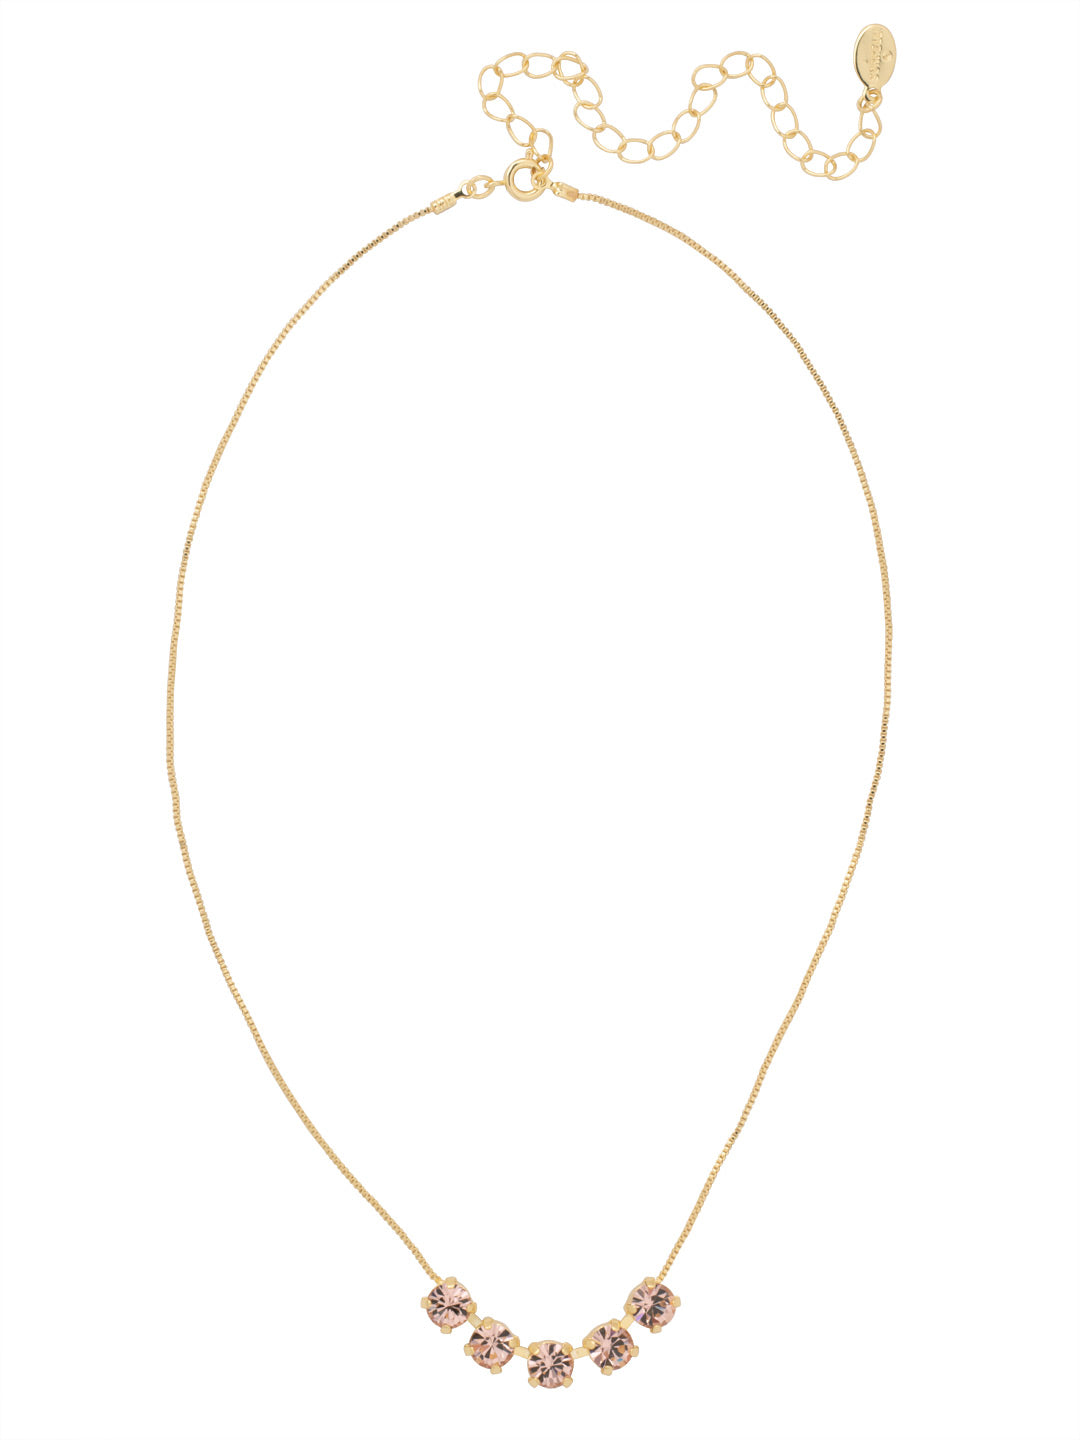 Shaughna Tennis Necklace - NFC84BGVIN - <p>The Shaughna Tennis Necklace features five crystals on a delicate adjustable chain. From Sorrelli's Vintage Rose collection in our Bright Gold-tone finish.</p>